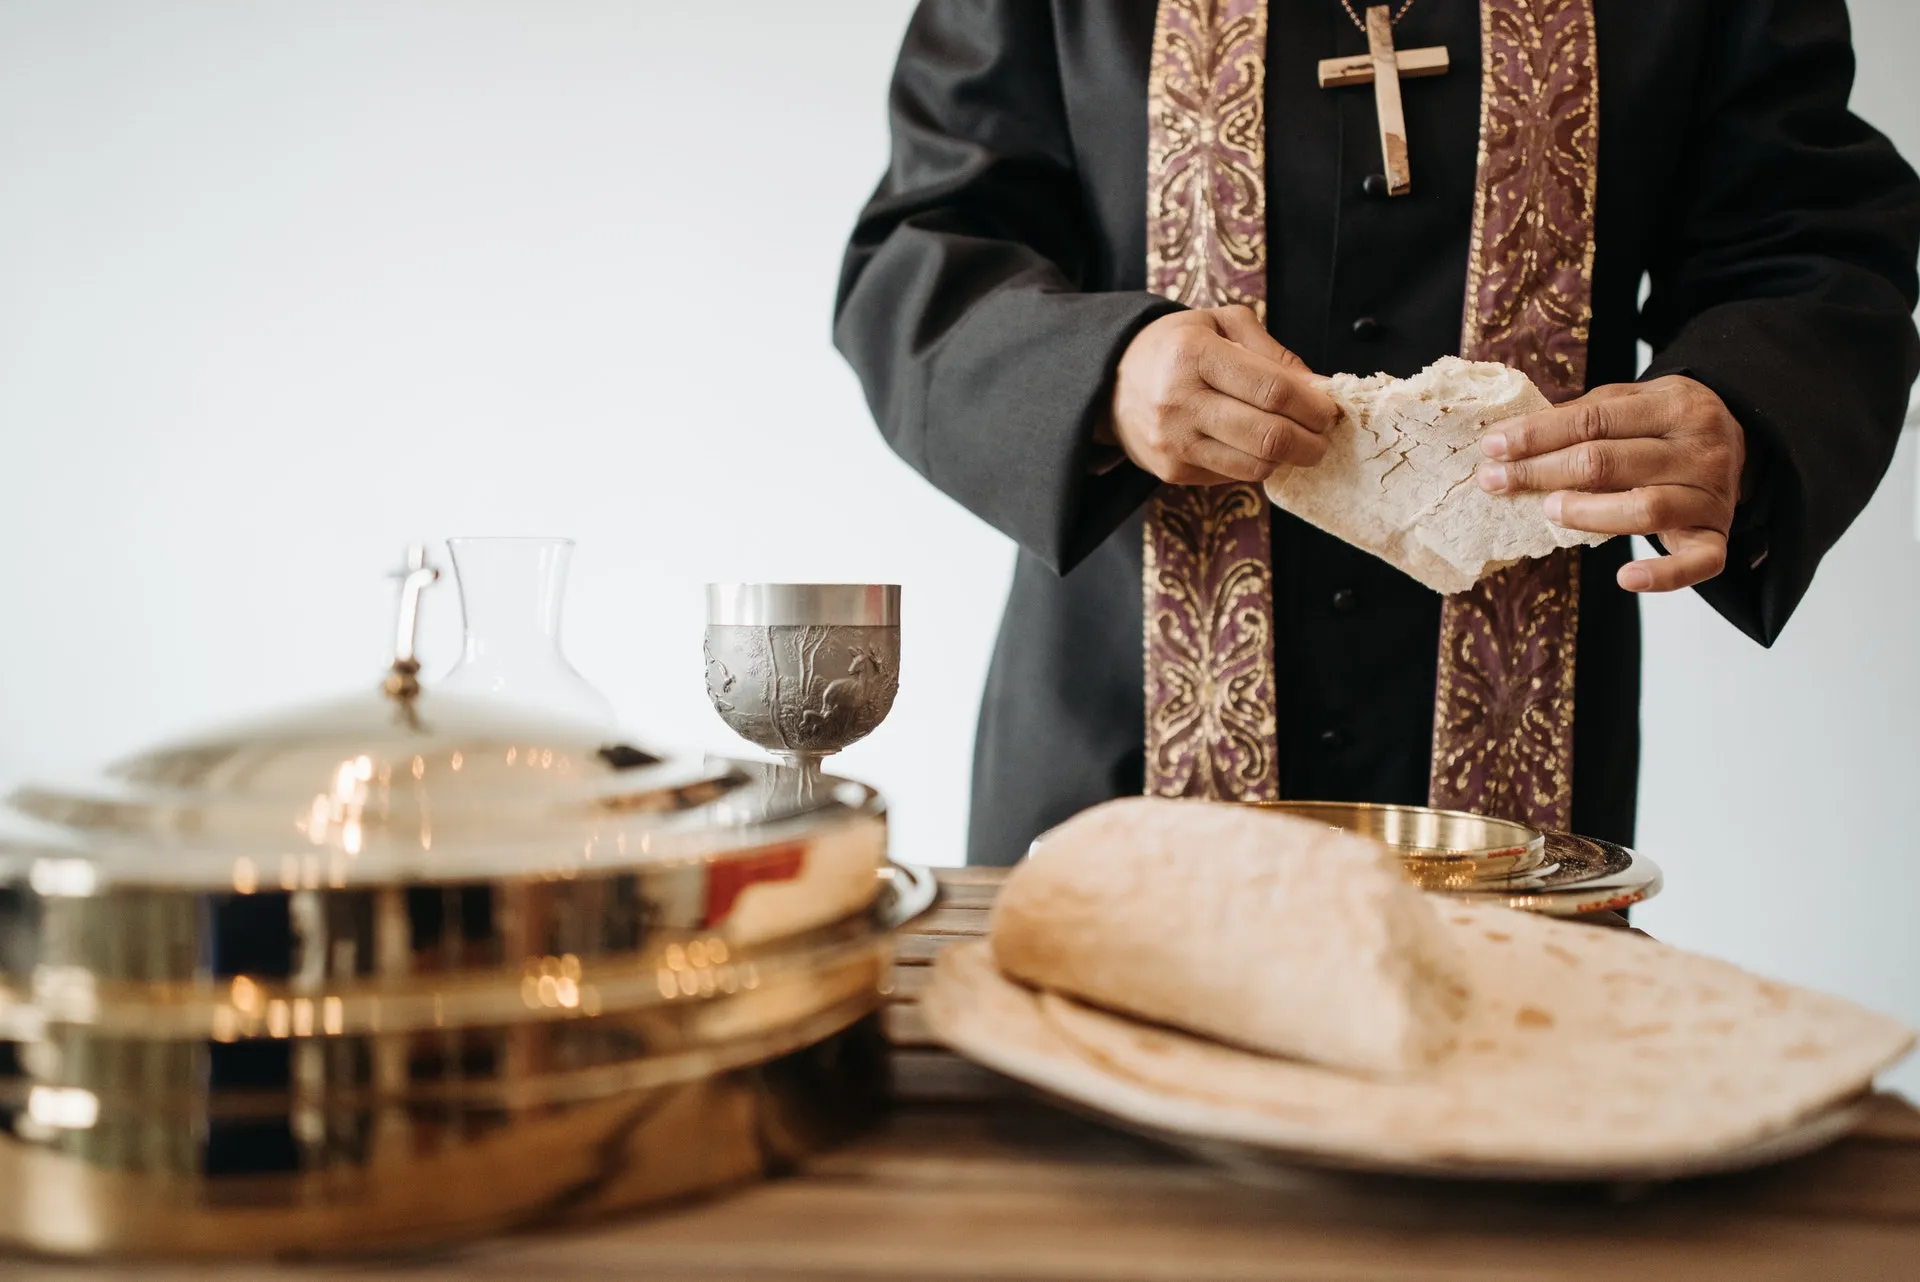 christianity food consumed on special occasions